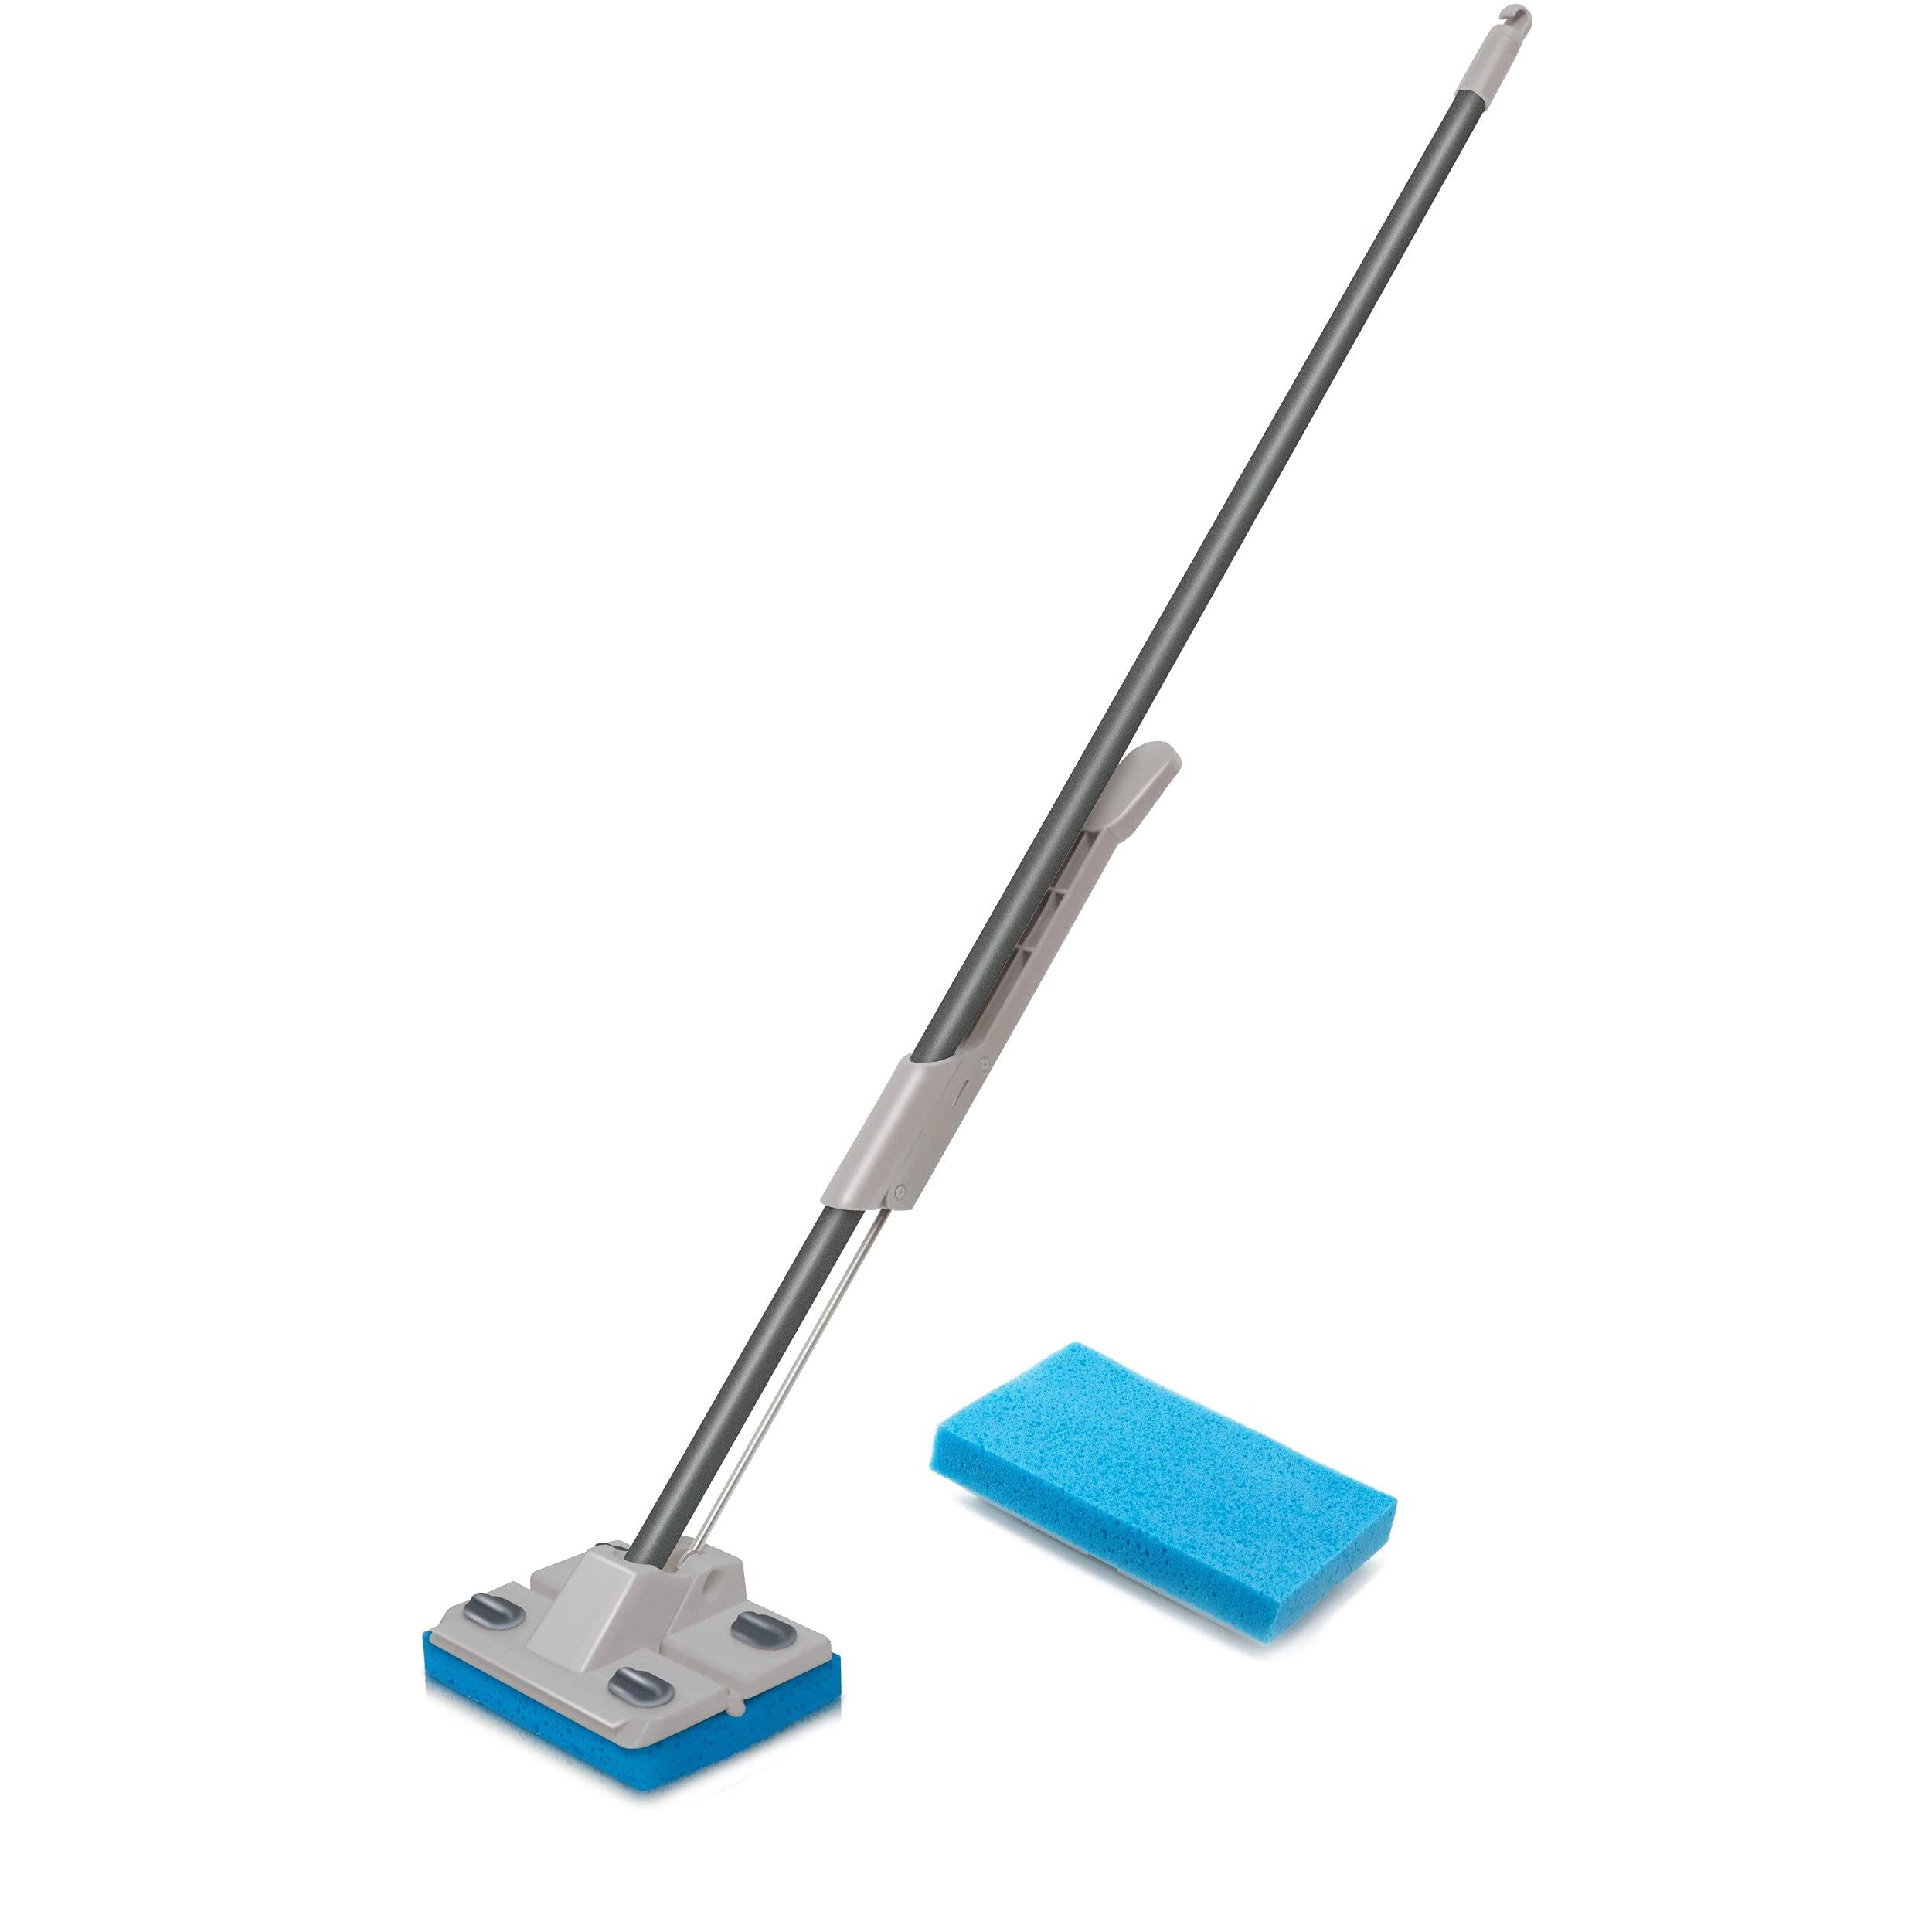 Addis Super Dry Mop - with Free Refill